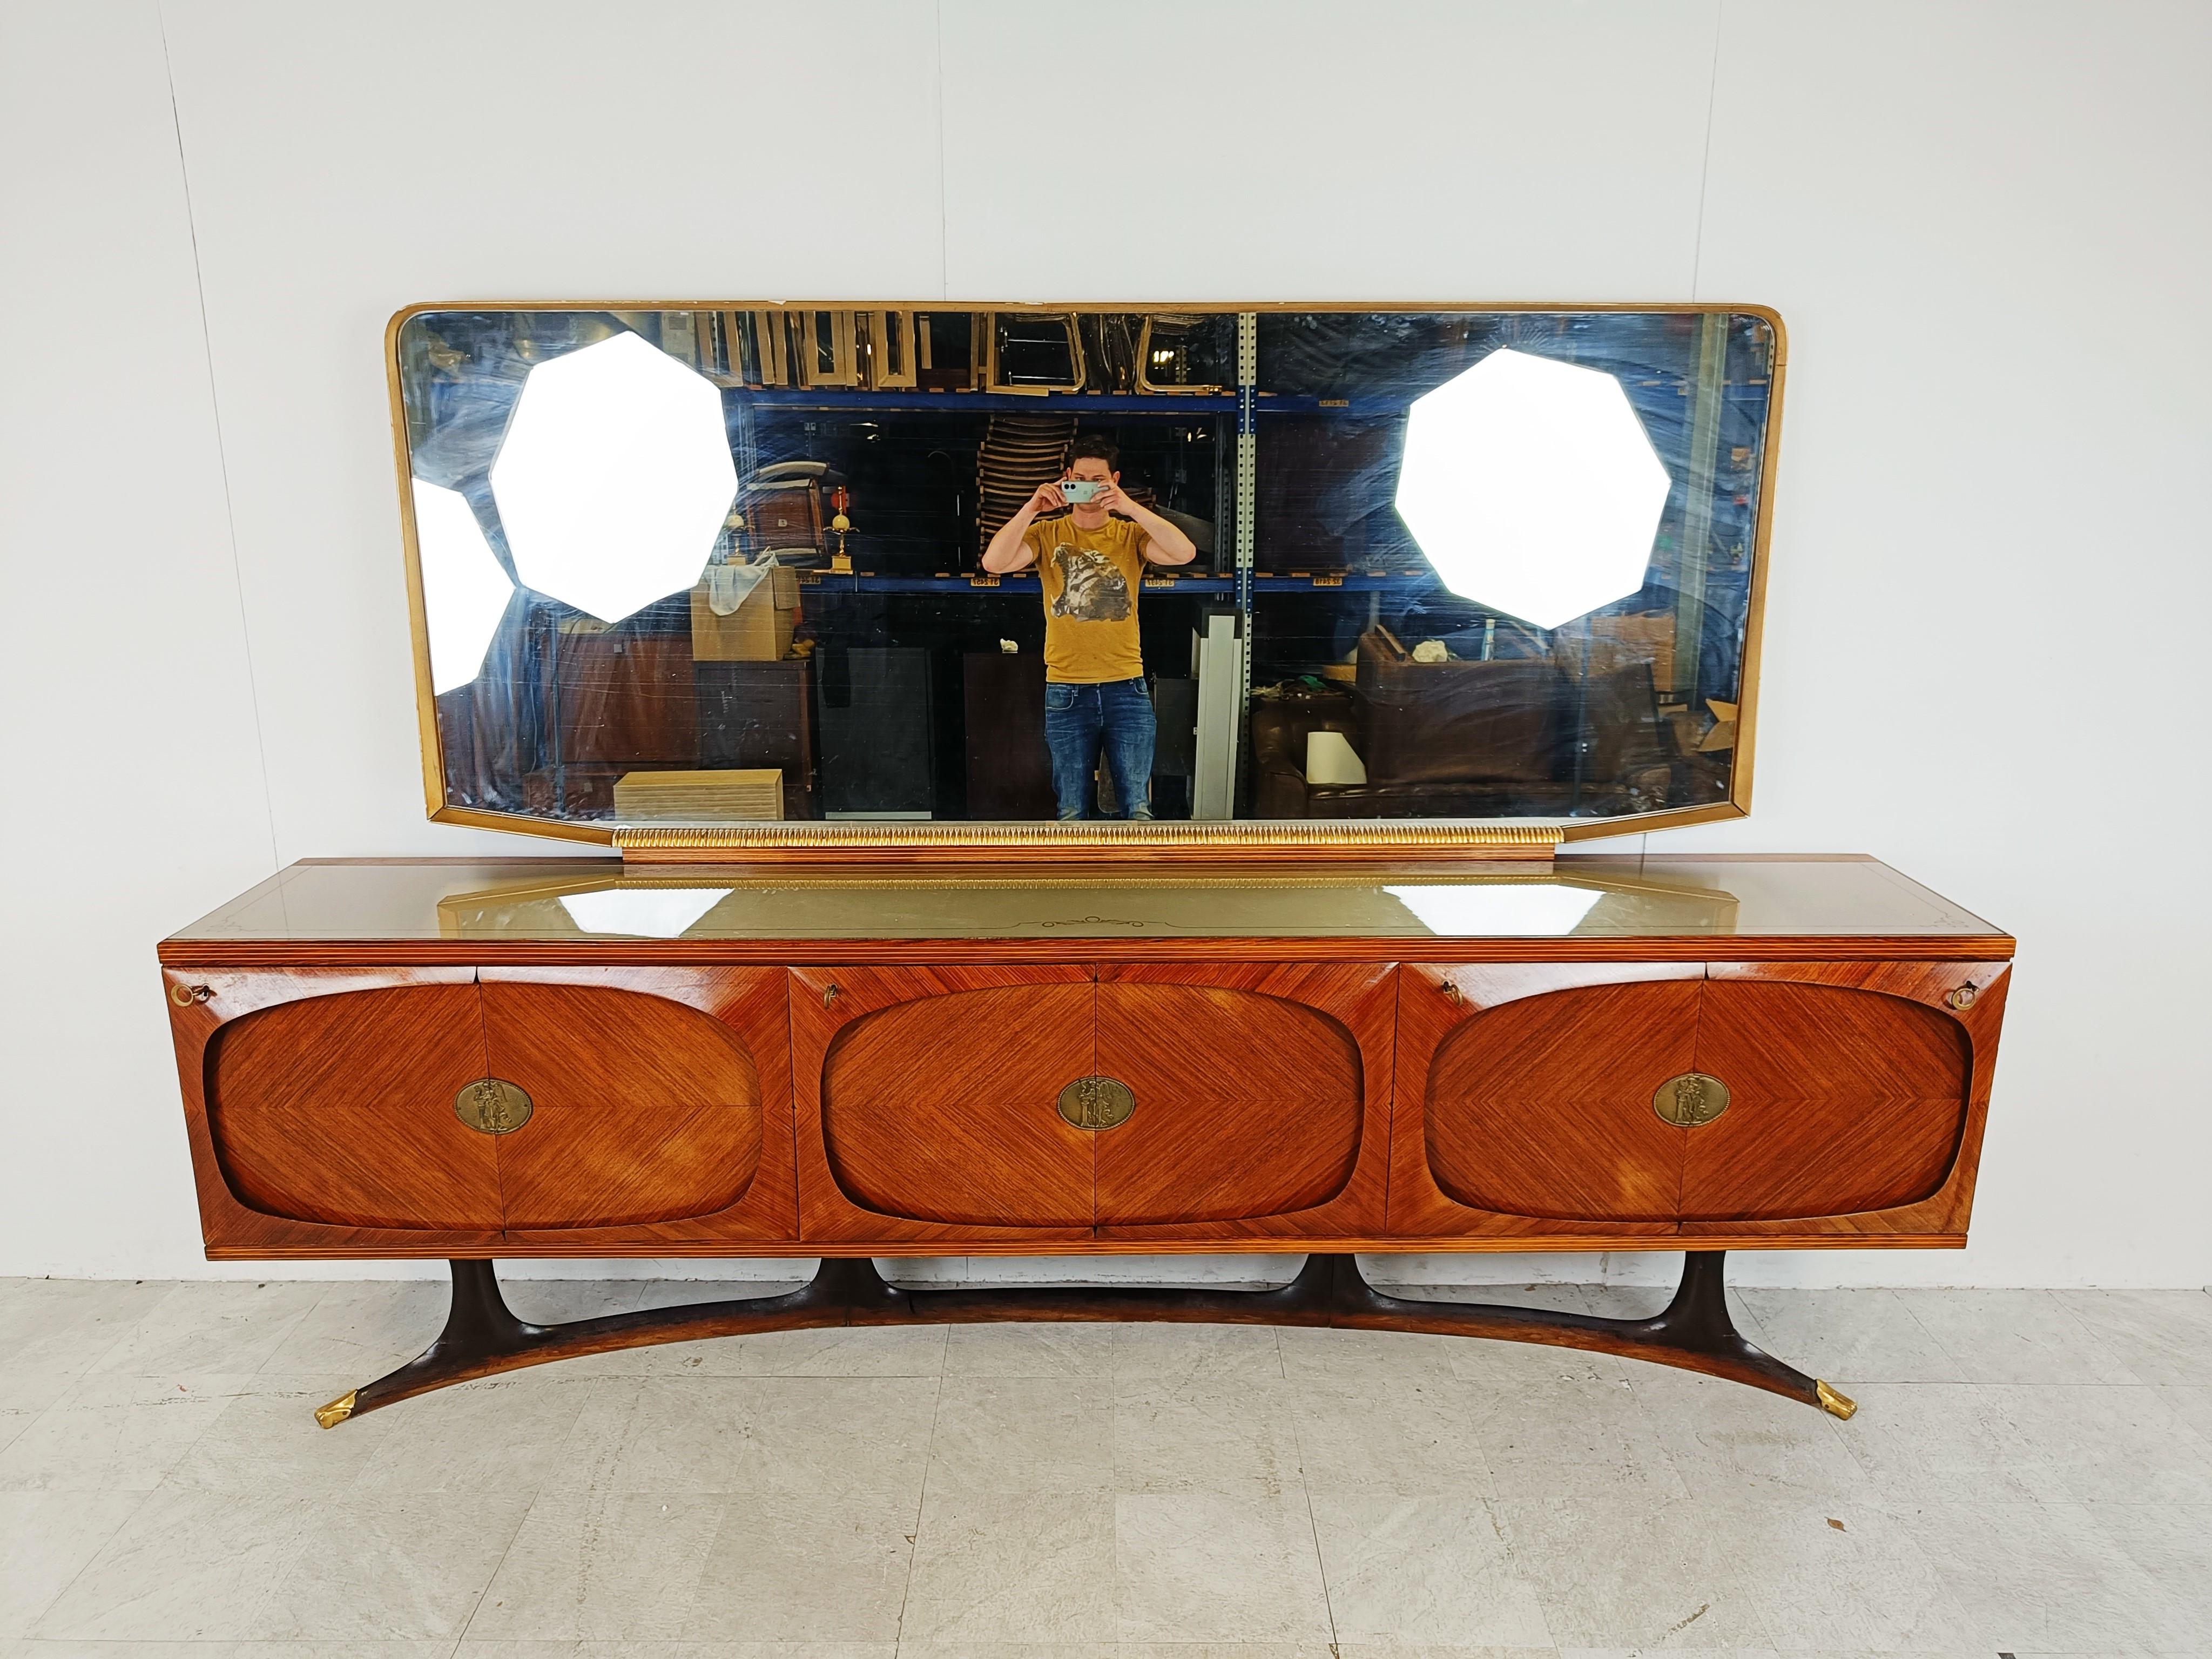 Very elegant mid century sideboard with mirror designed by Vittorio Dassi for Lissone.

This rosewood sideboard consists of six doors each decorated with a brass medaillon. 

The doors are beautifully designed with a finely crafted edge which serves